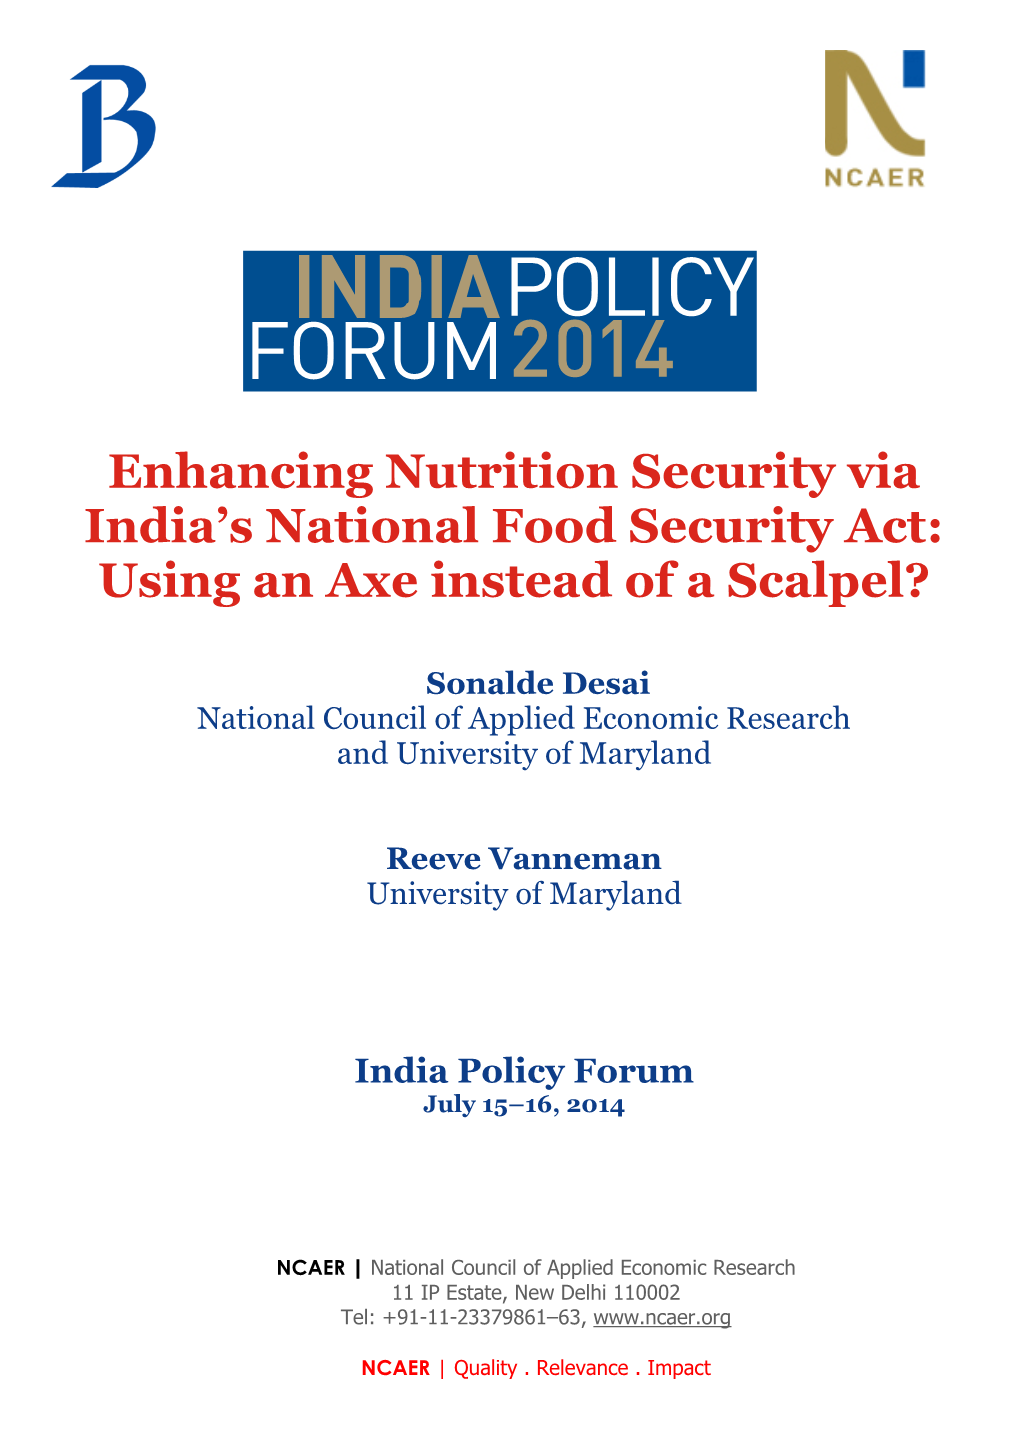 POLICY FORUM2014 Enhancing Nutrition Security Via India’S National Food Security Act: Using an Axe Instead of a Scalpel?